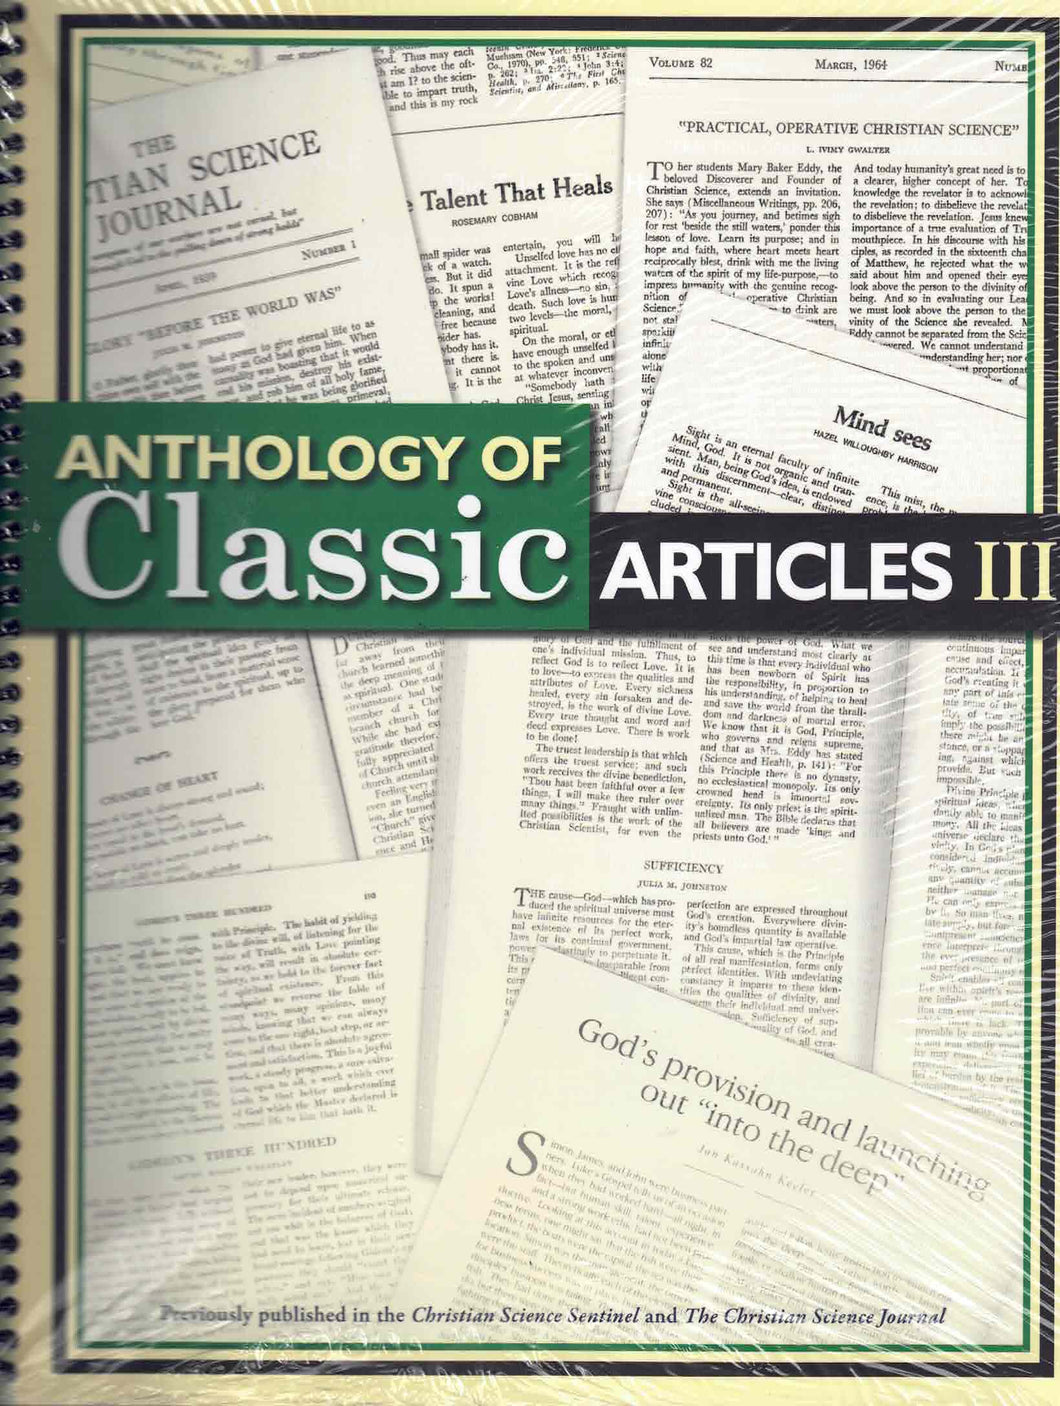 Anthology of Classic Articles III